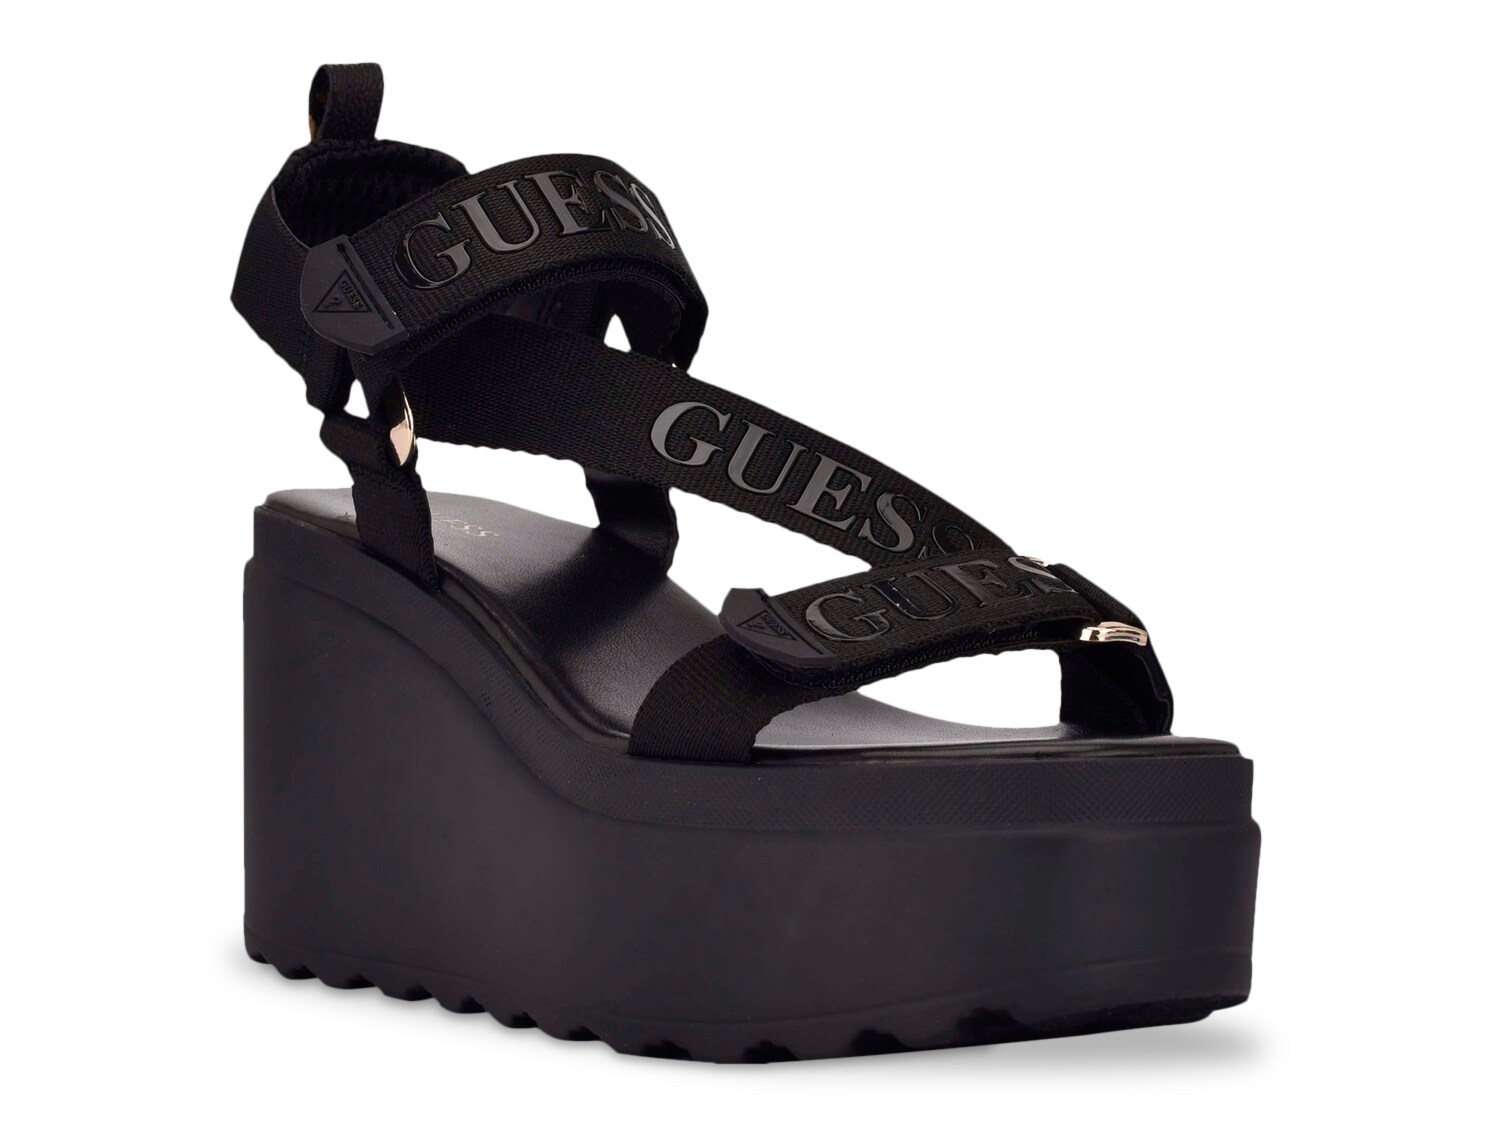 Guess Ocilia Wedge Sandal - Free Shipping | DSW